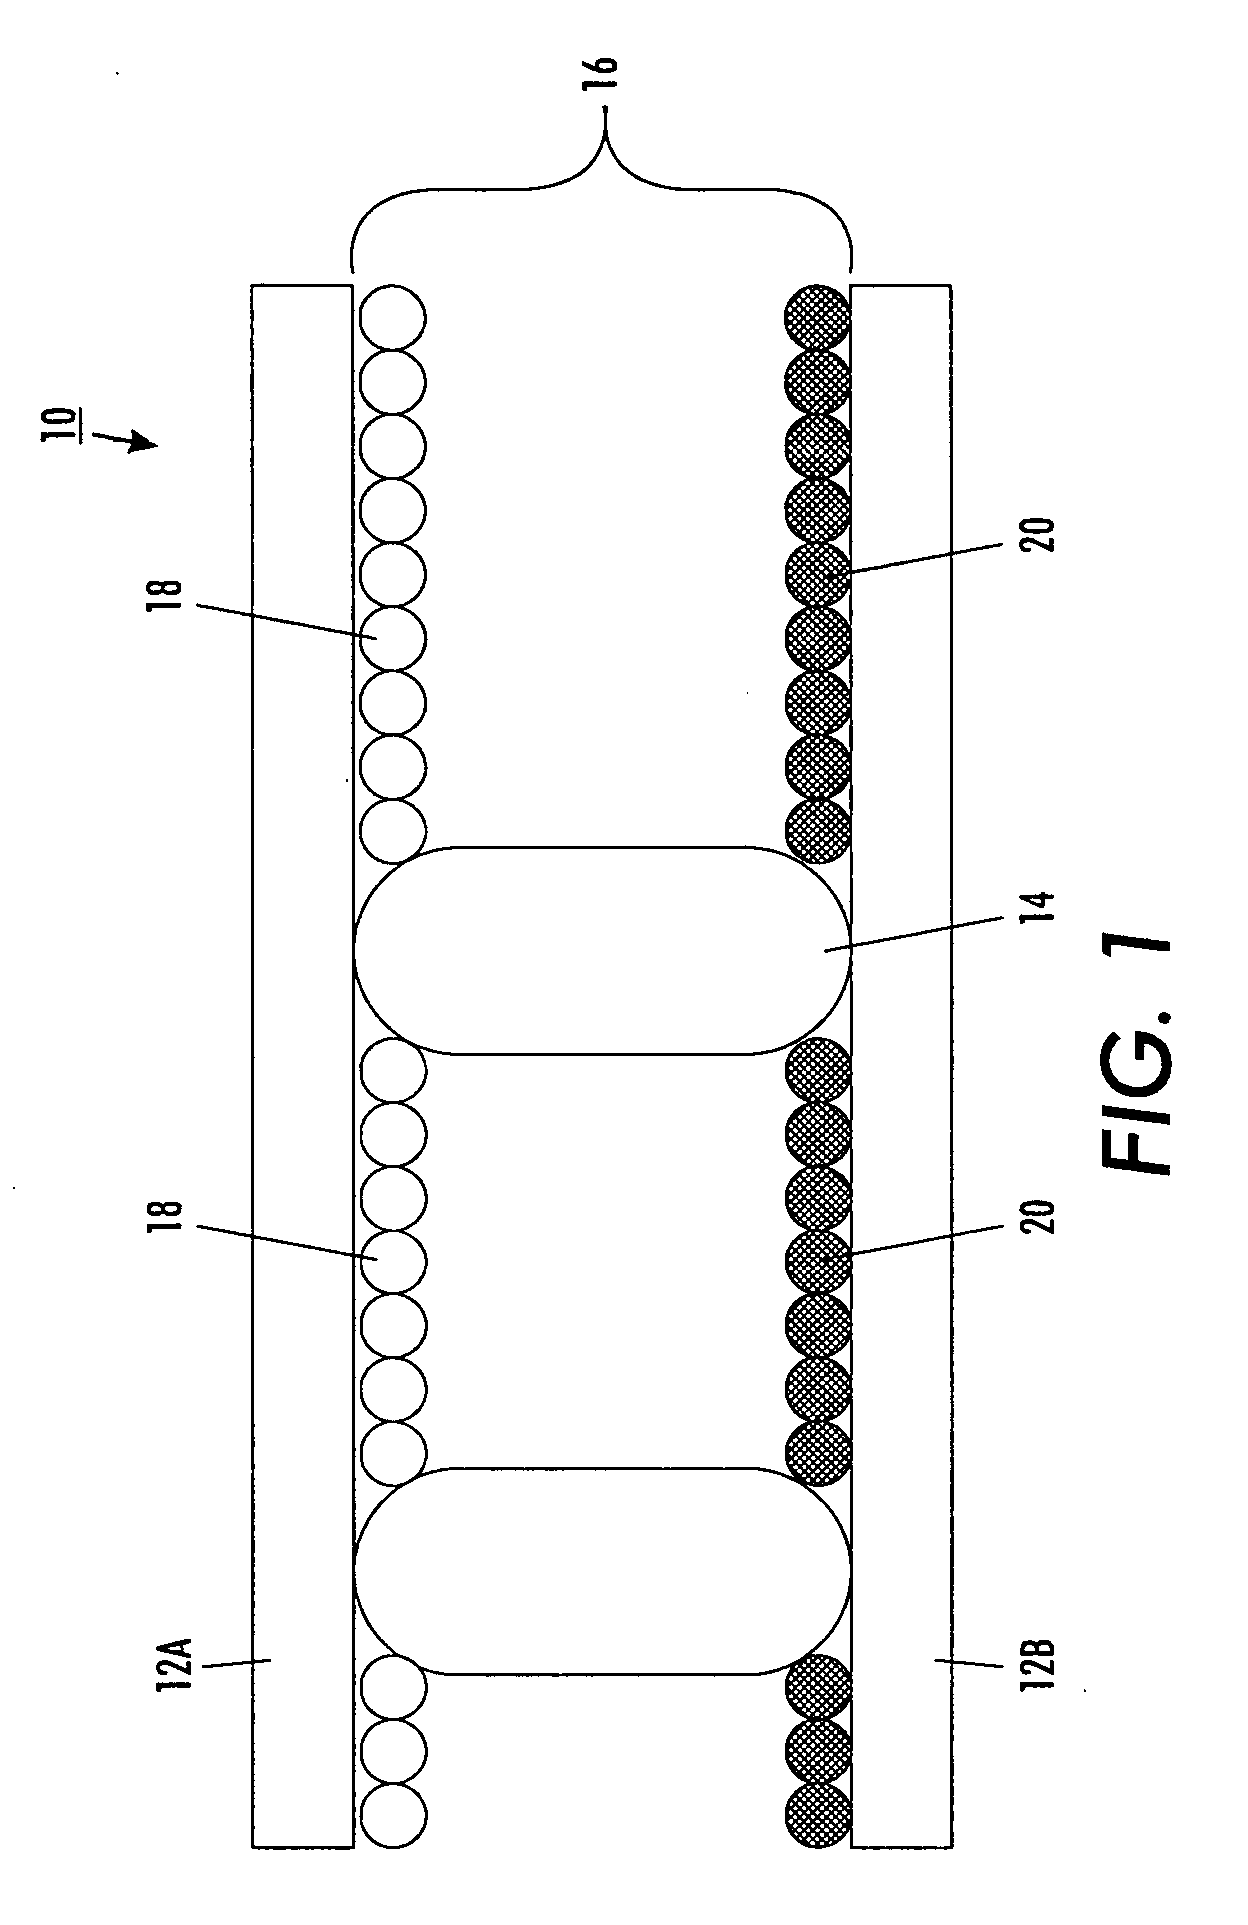 Toner compositions for dry-powder electrophoretic displays